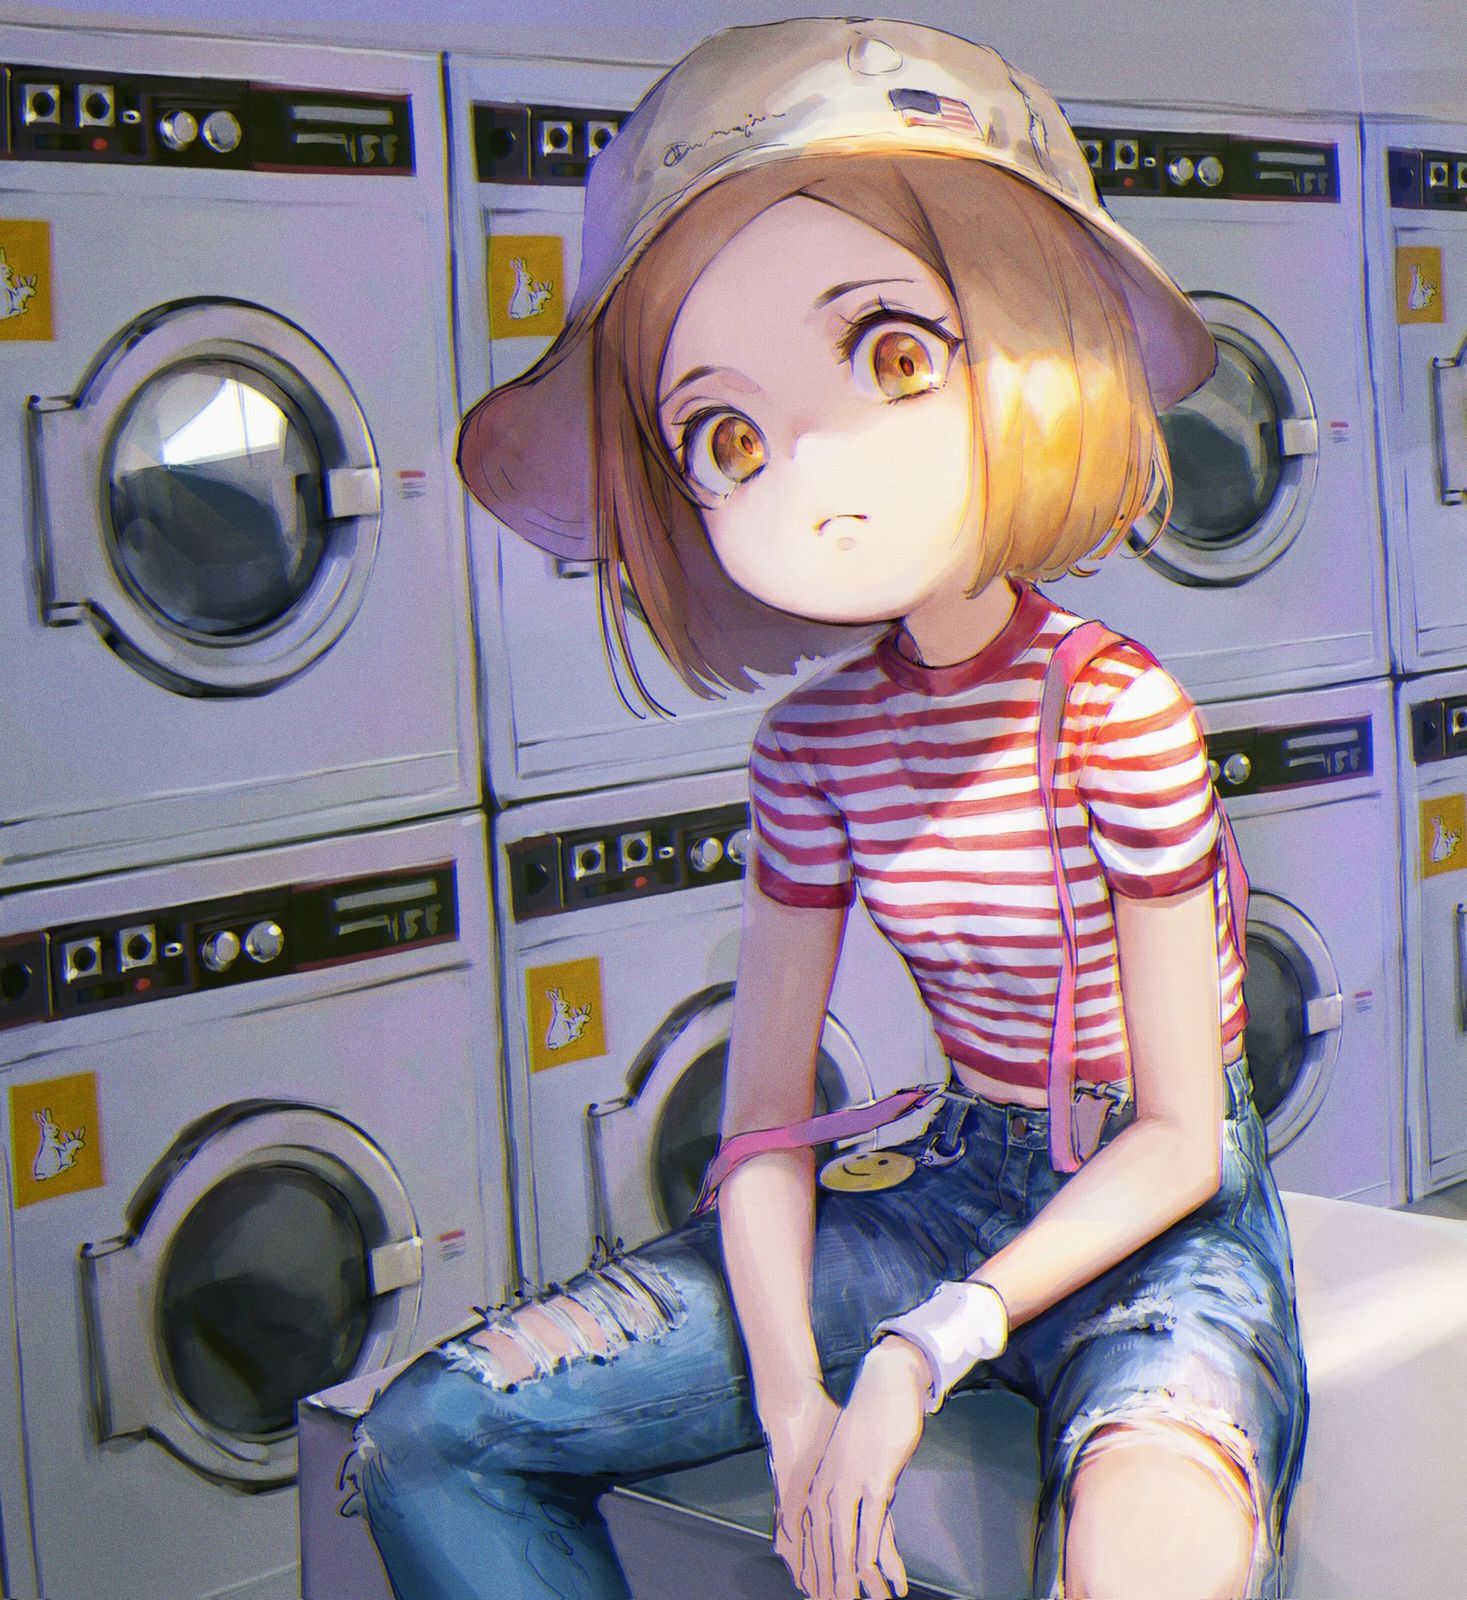 [Lori Denim] I tried to collect stylish and cute moe image of Lori girl wearing jeans and denim products! 30